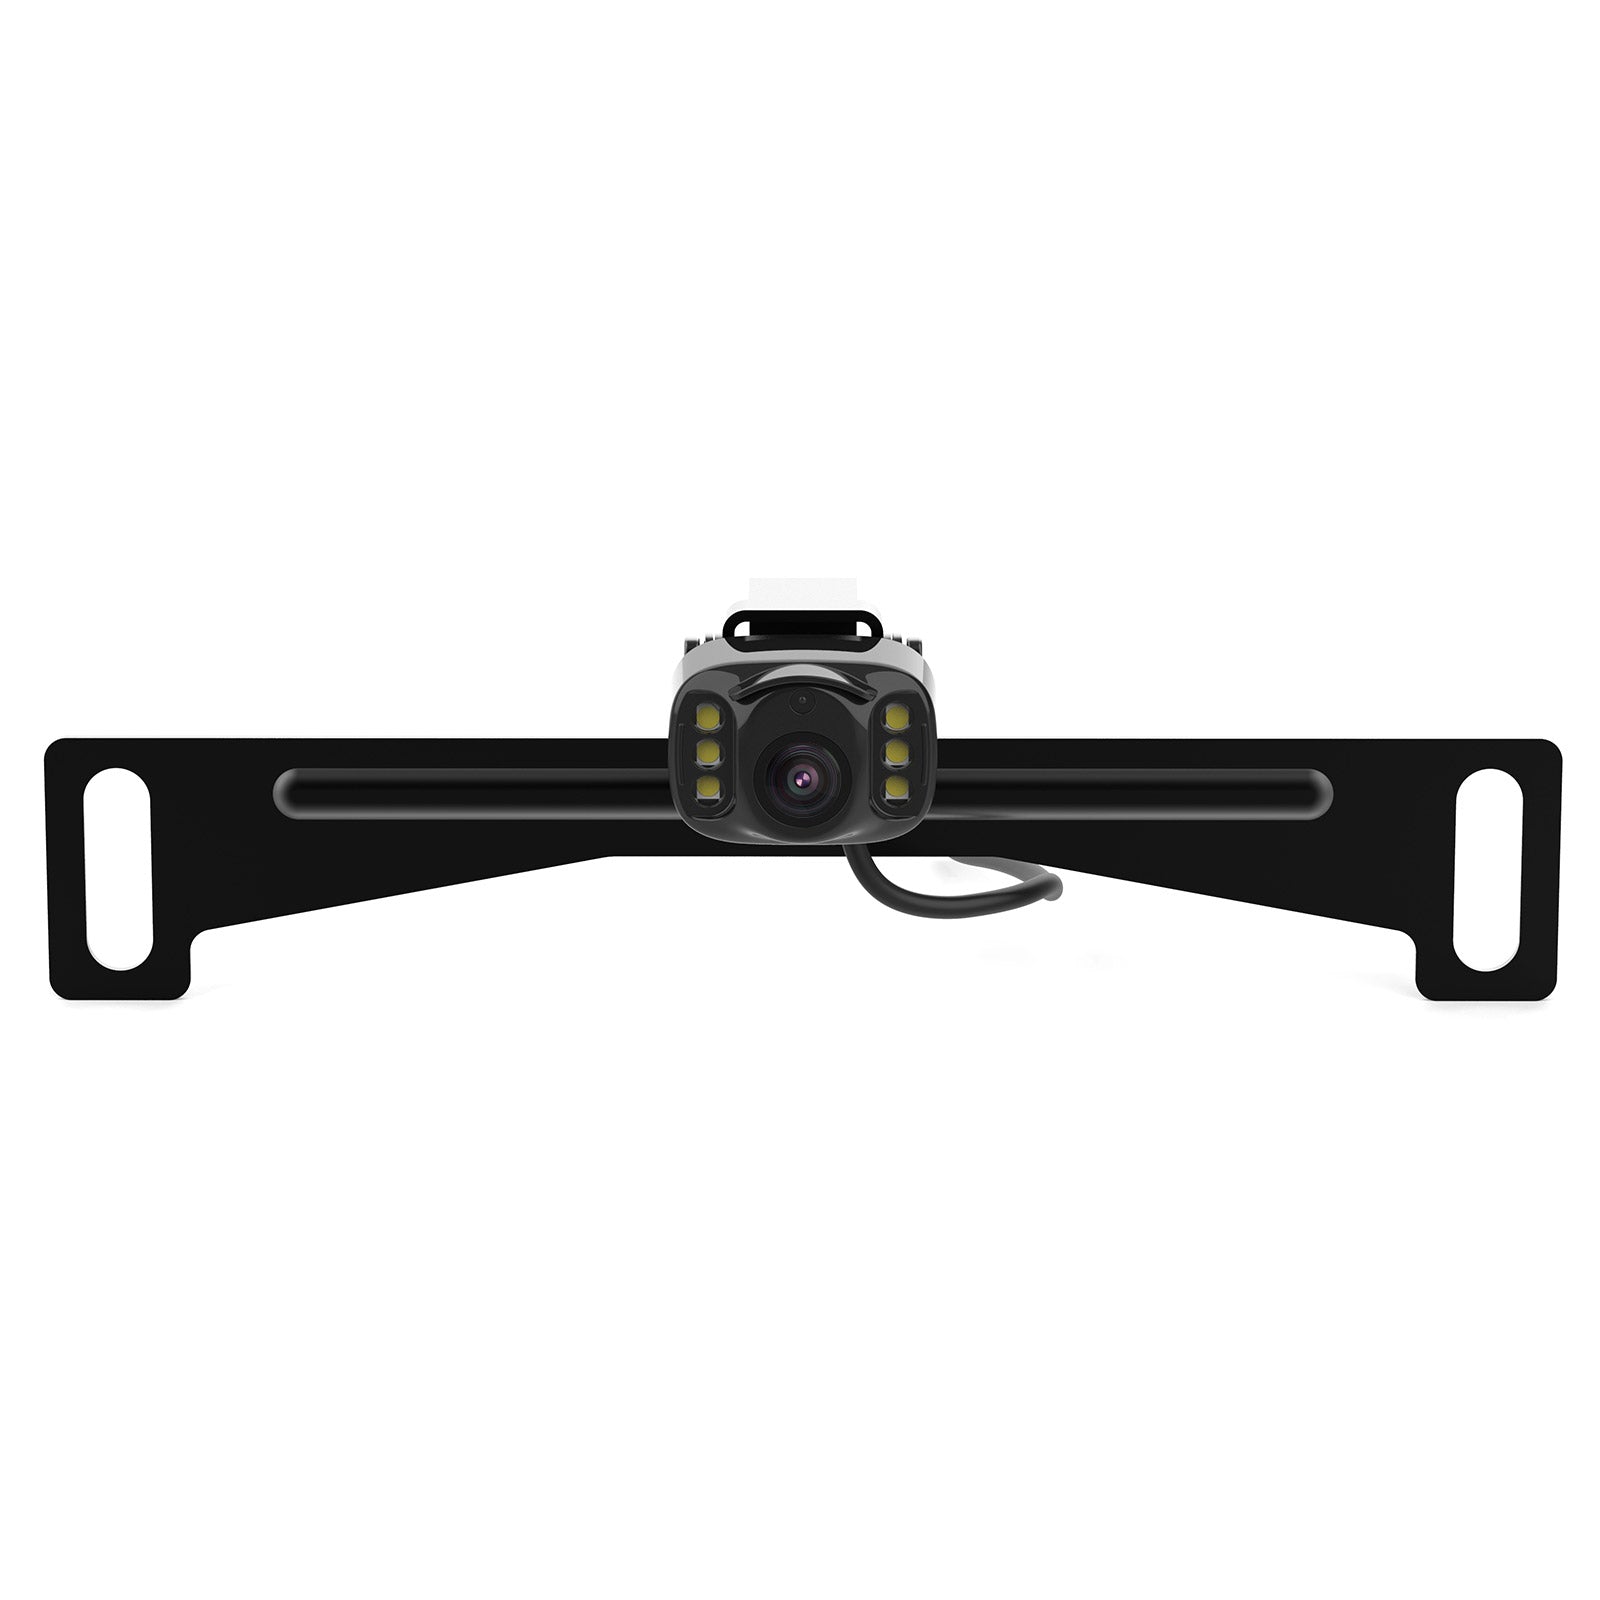 Rearmaster License Plate Camera Support Mirrored/Non-mirrored Switch,G